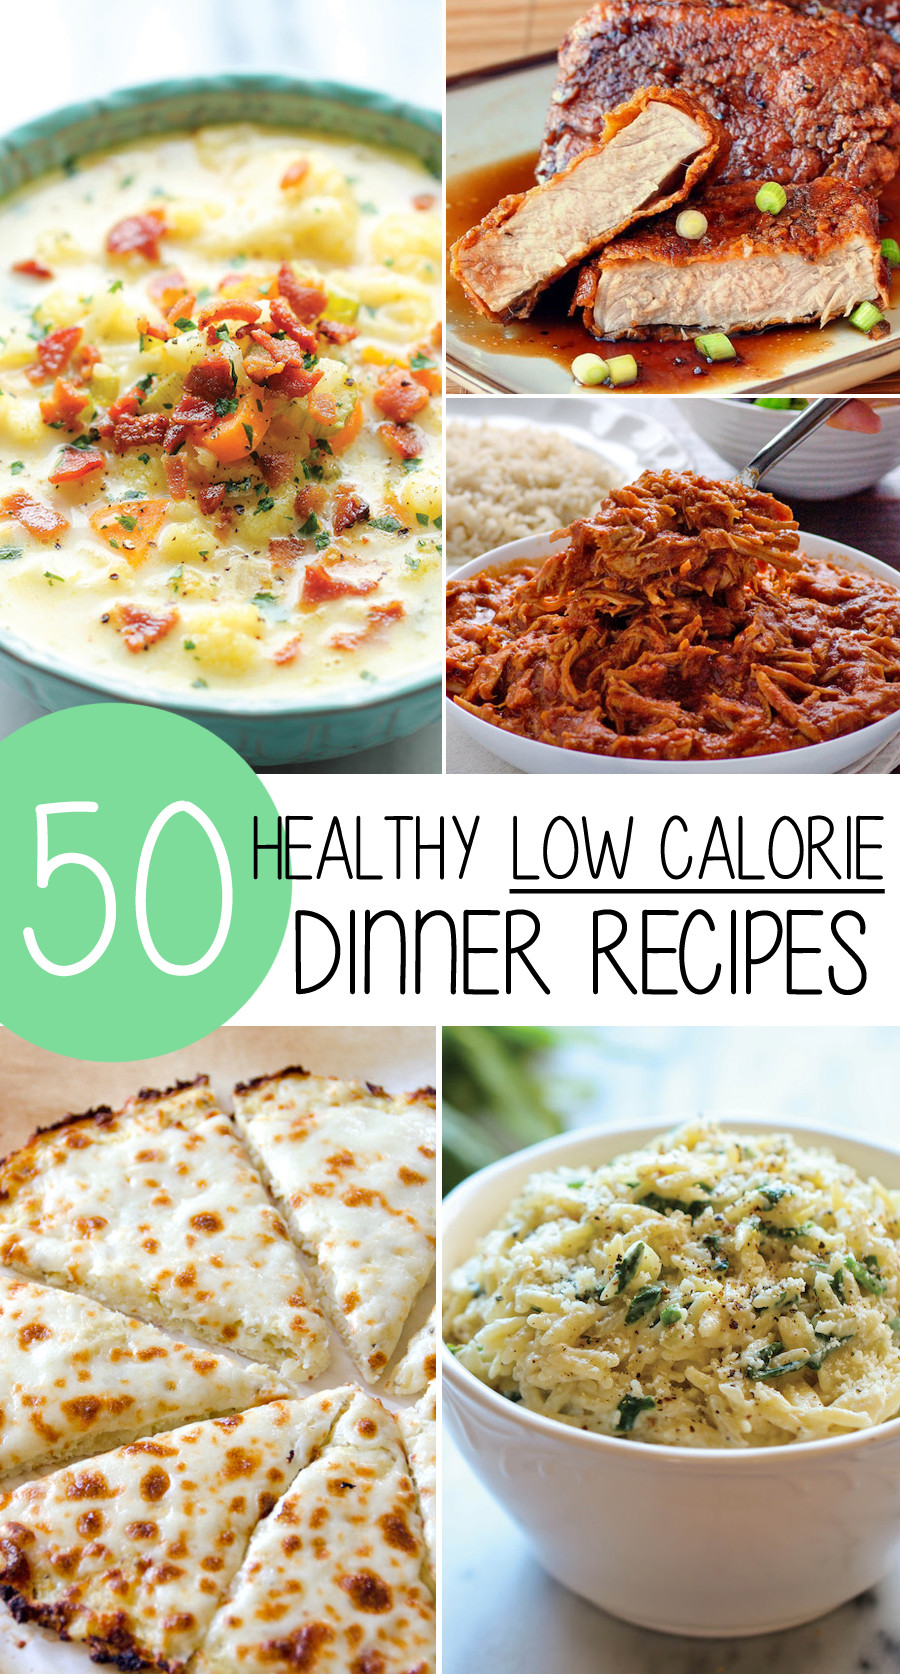 Low Calorie Dinner Recipes For Weight Loss
 50 Healthy Low Calorie Weight Loss Dinner Recipes